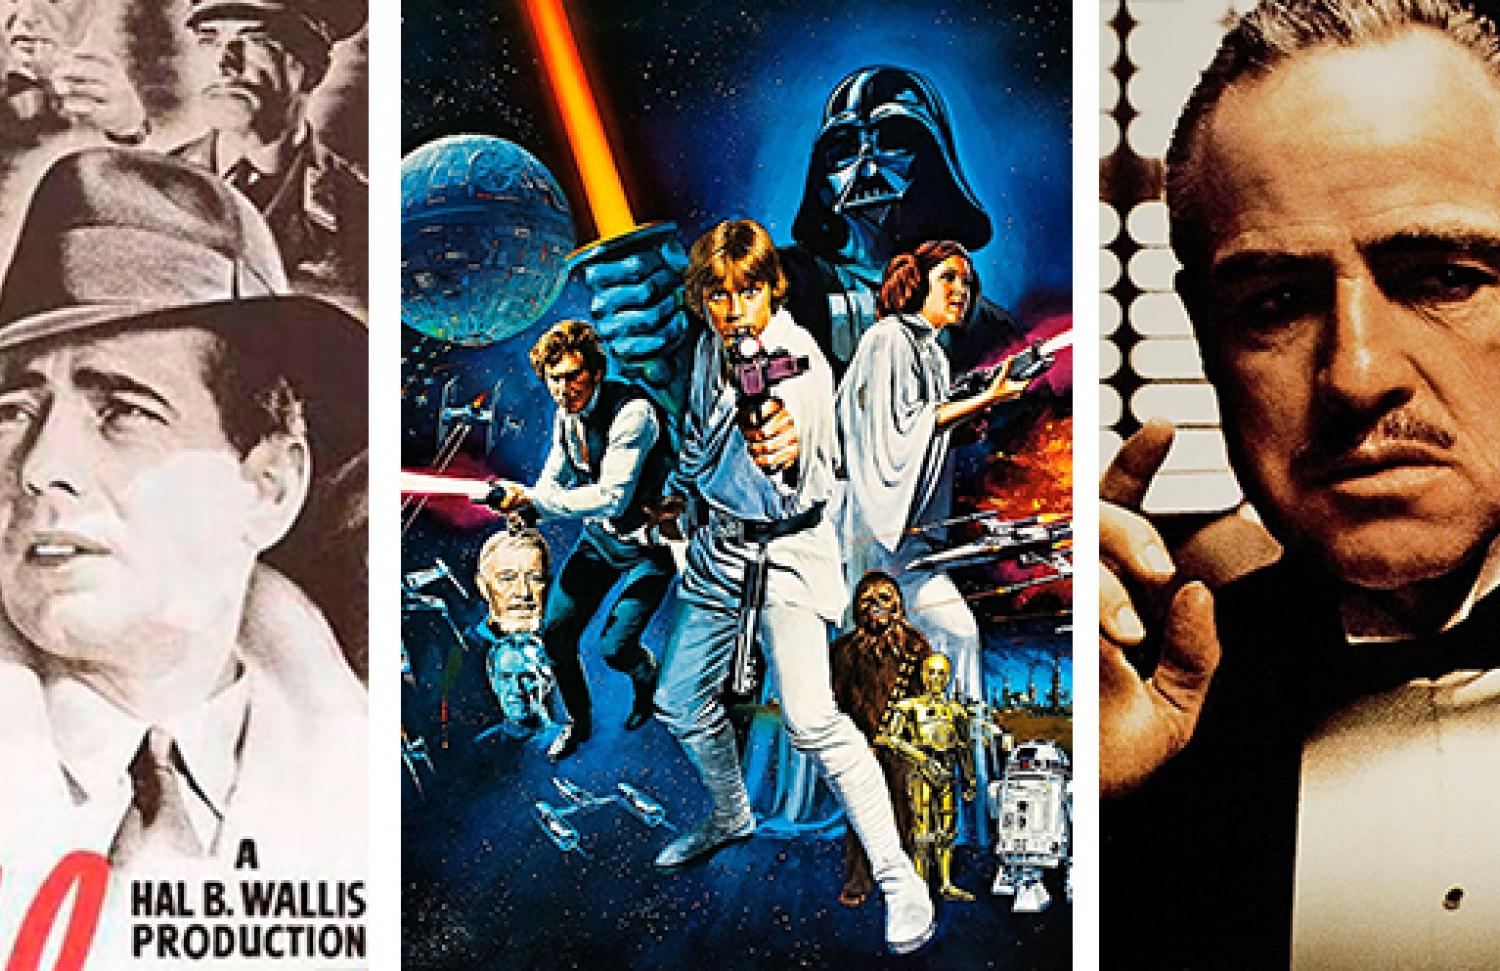 Casablanca, Star War, and The Godfather posters